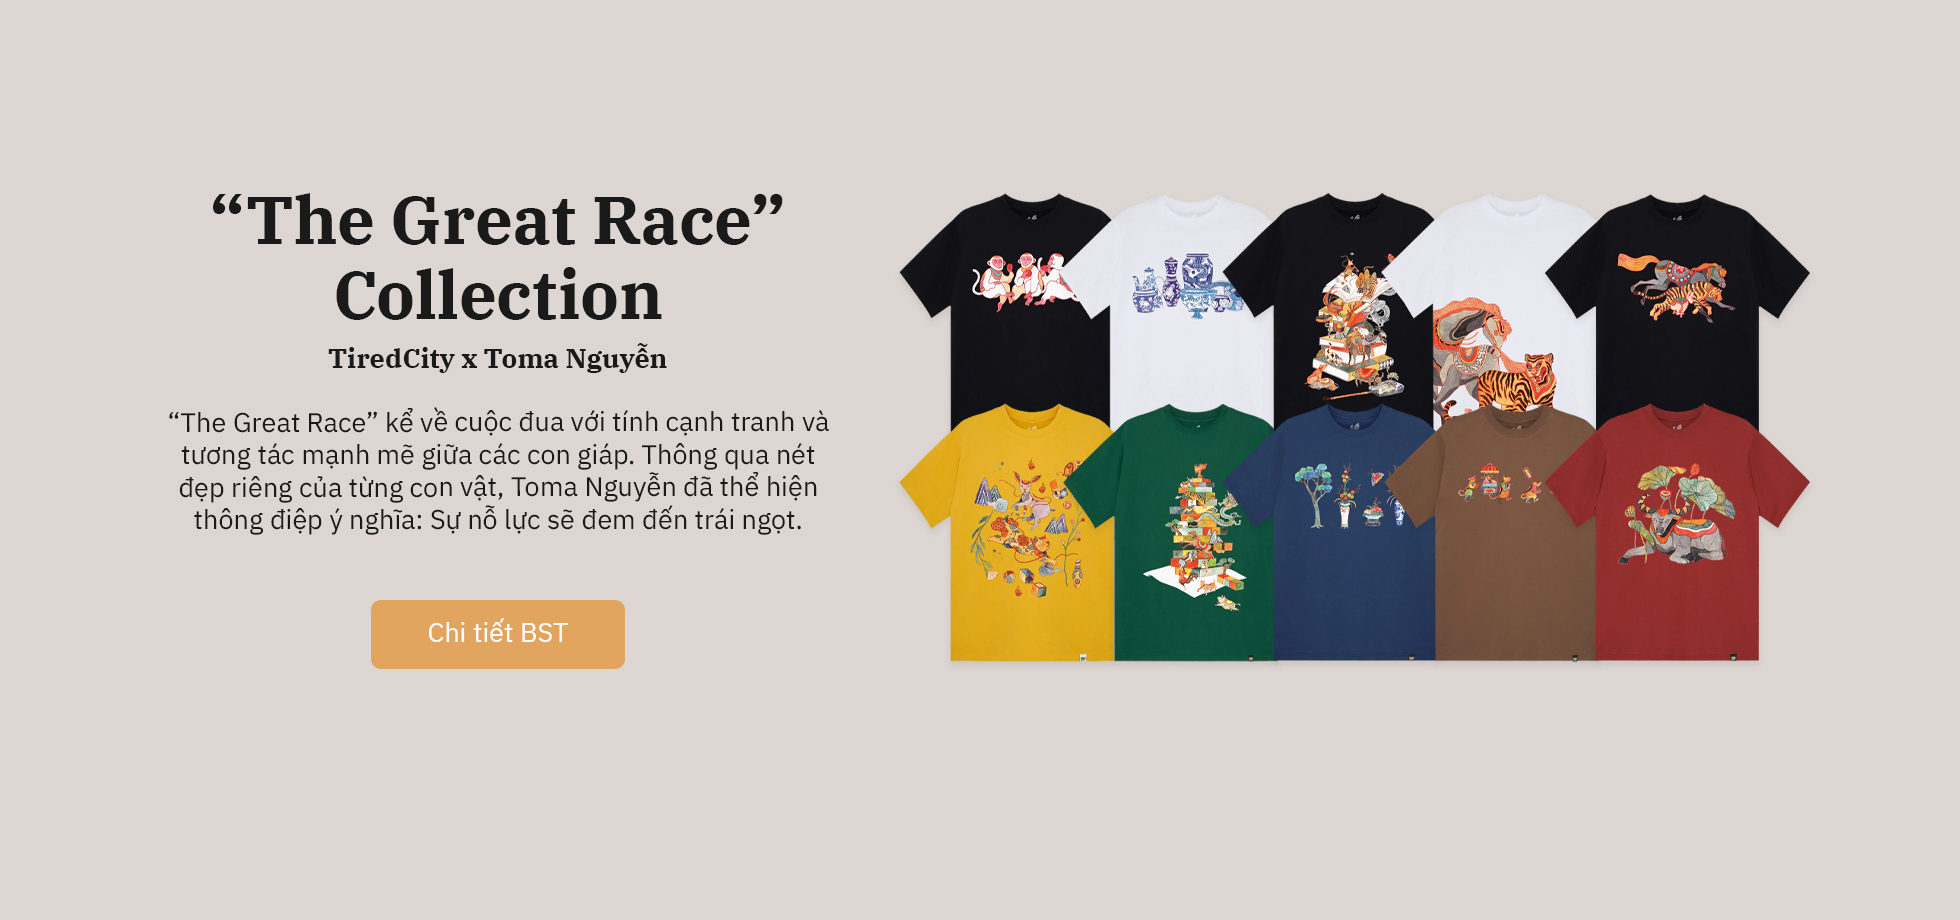 The Great Race Collection